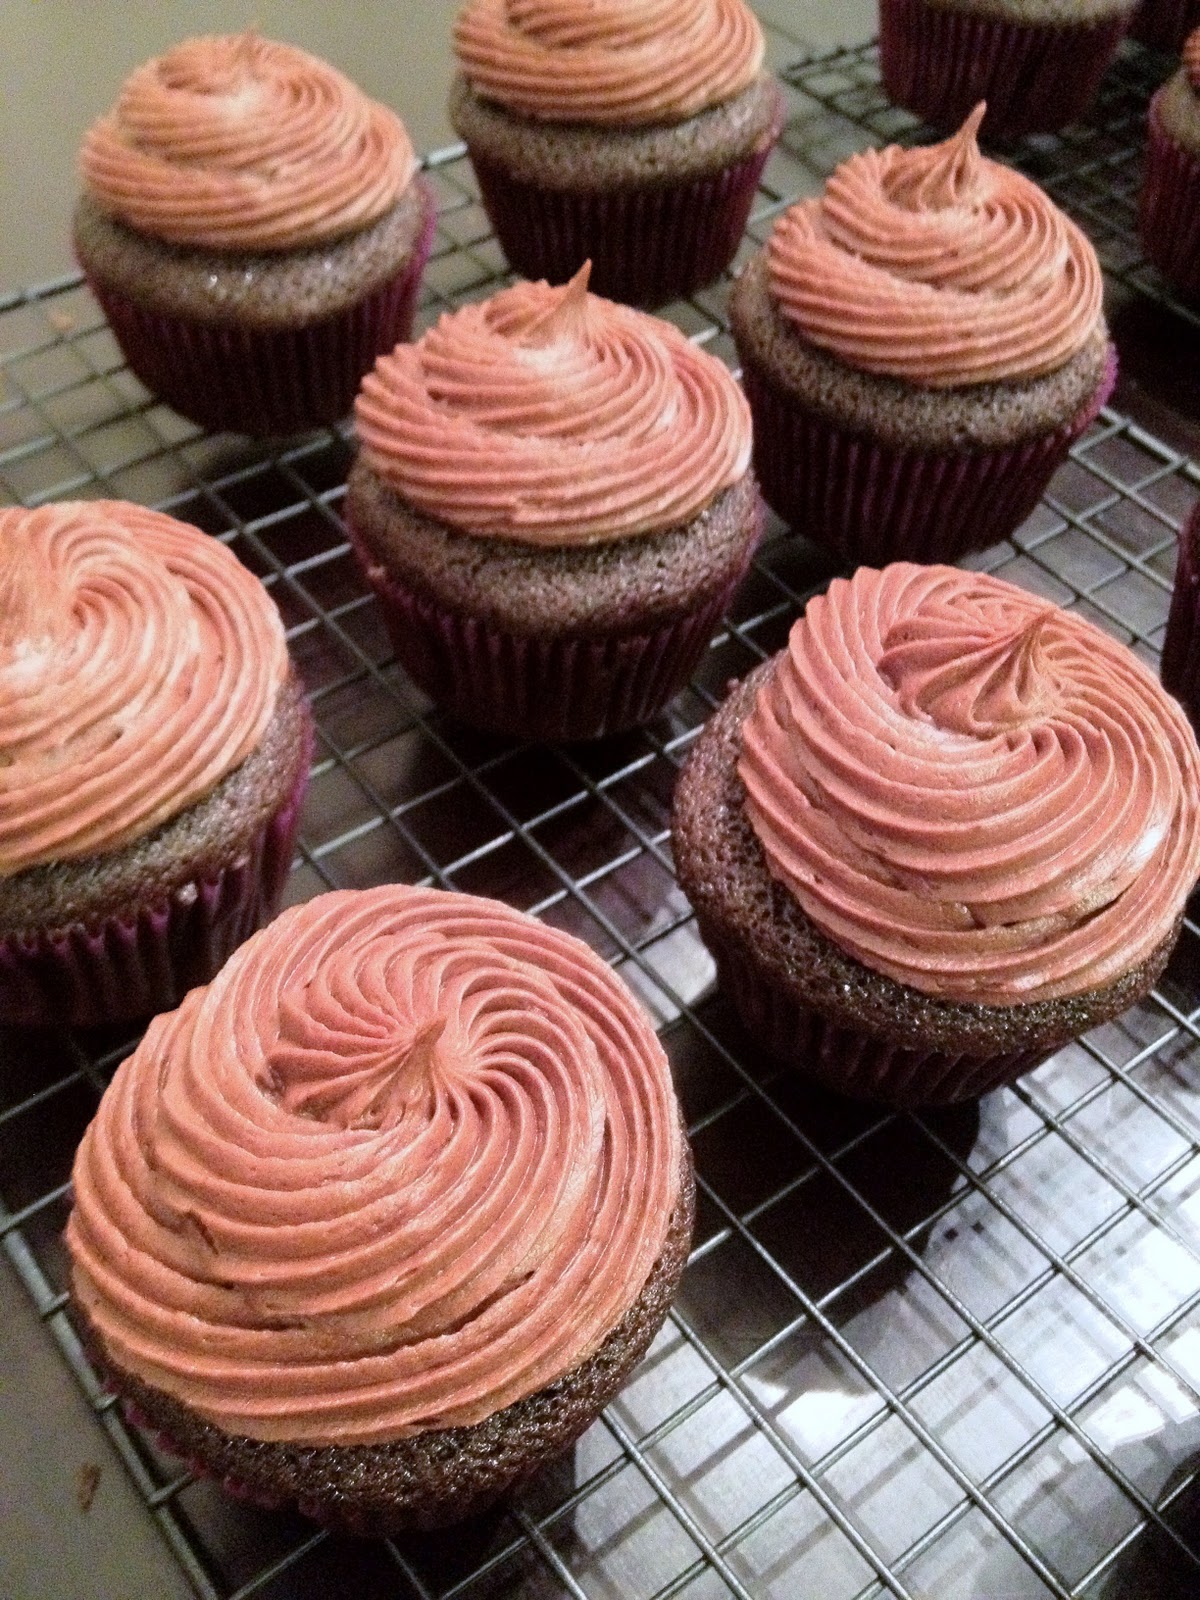 A Love for Cupcakes: Celebrating National Chocolate Cupcake Day